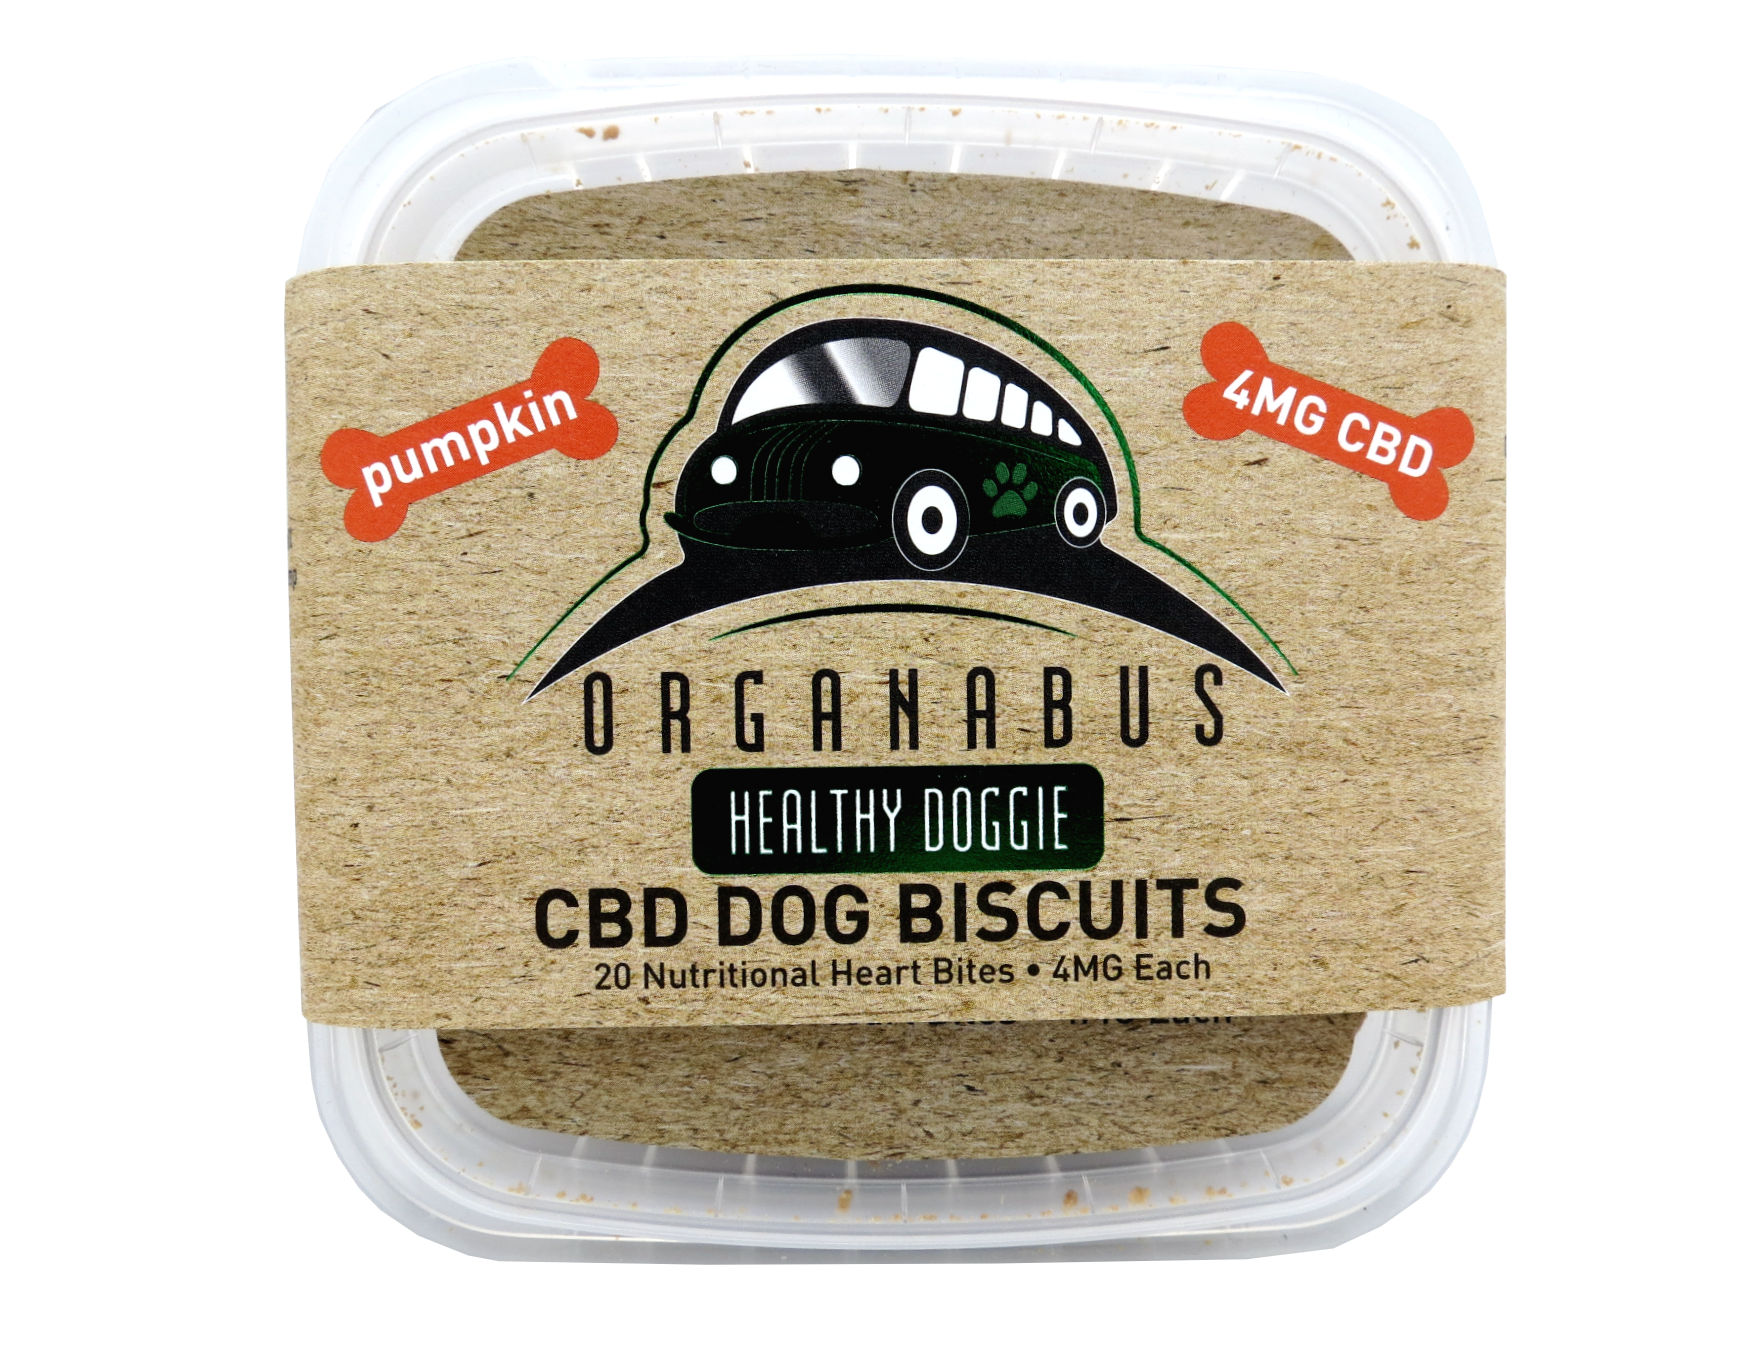 ORGANABUS HEALTHY CBD DOG BISCUITS 4MG 20CT